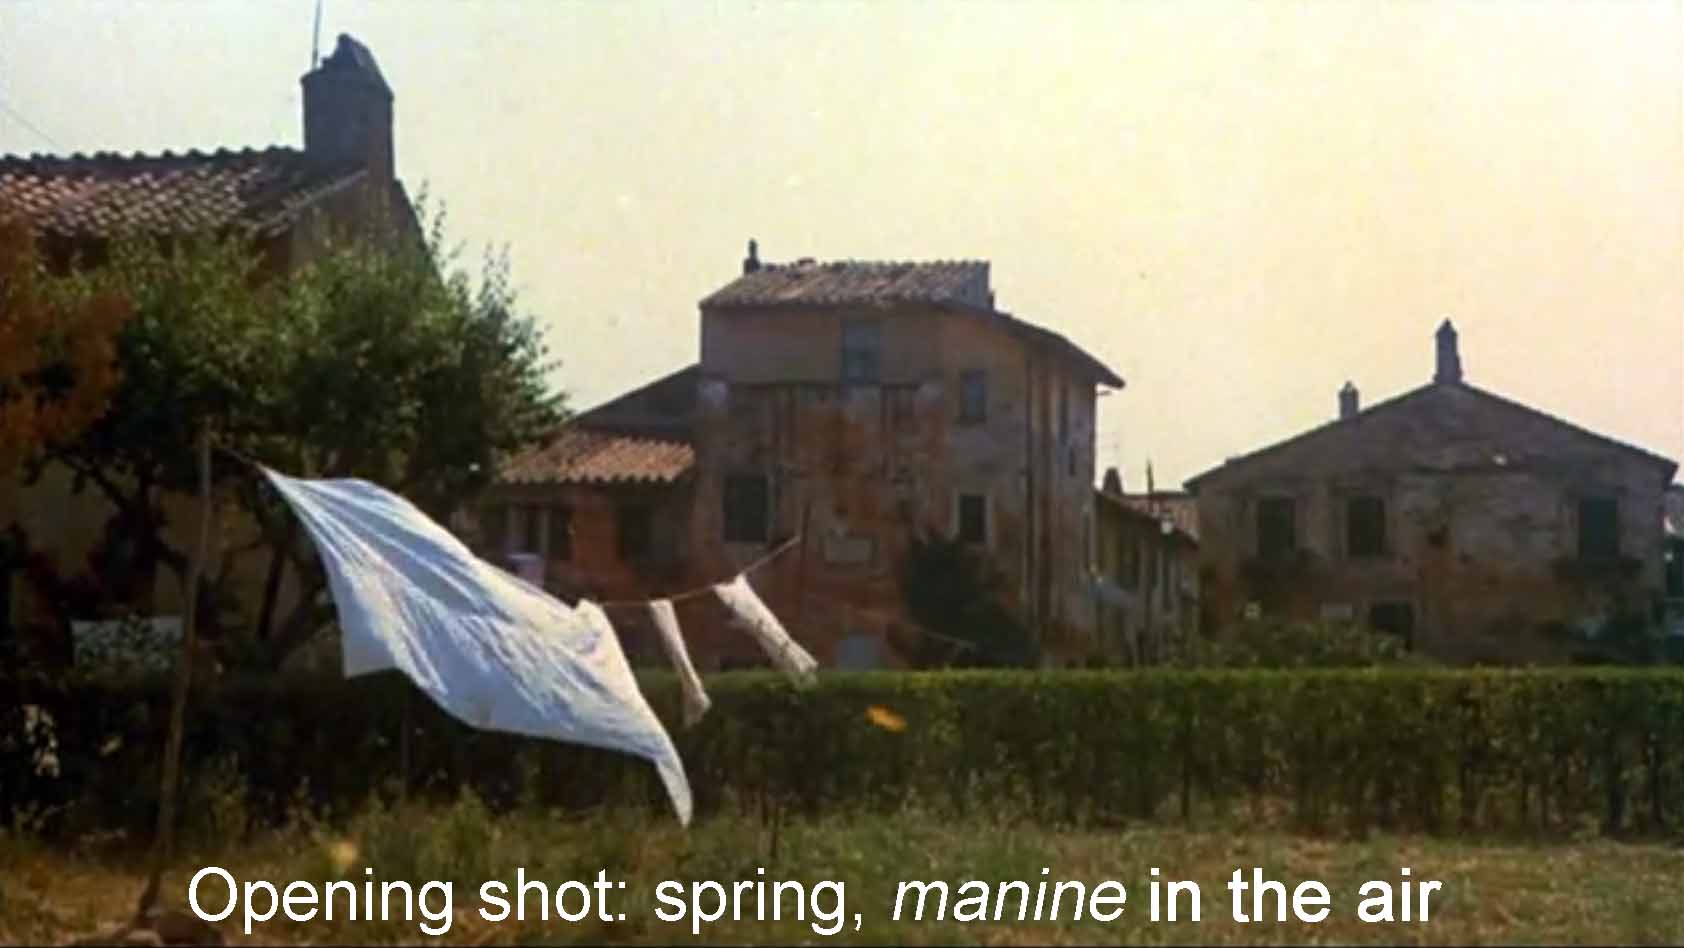 Opening shot: spring, manine in the air